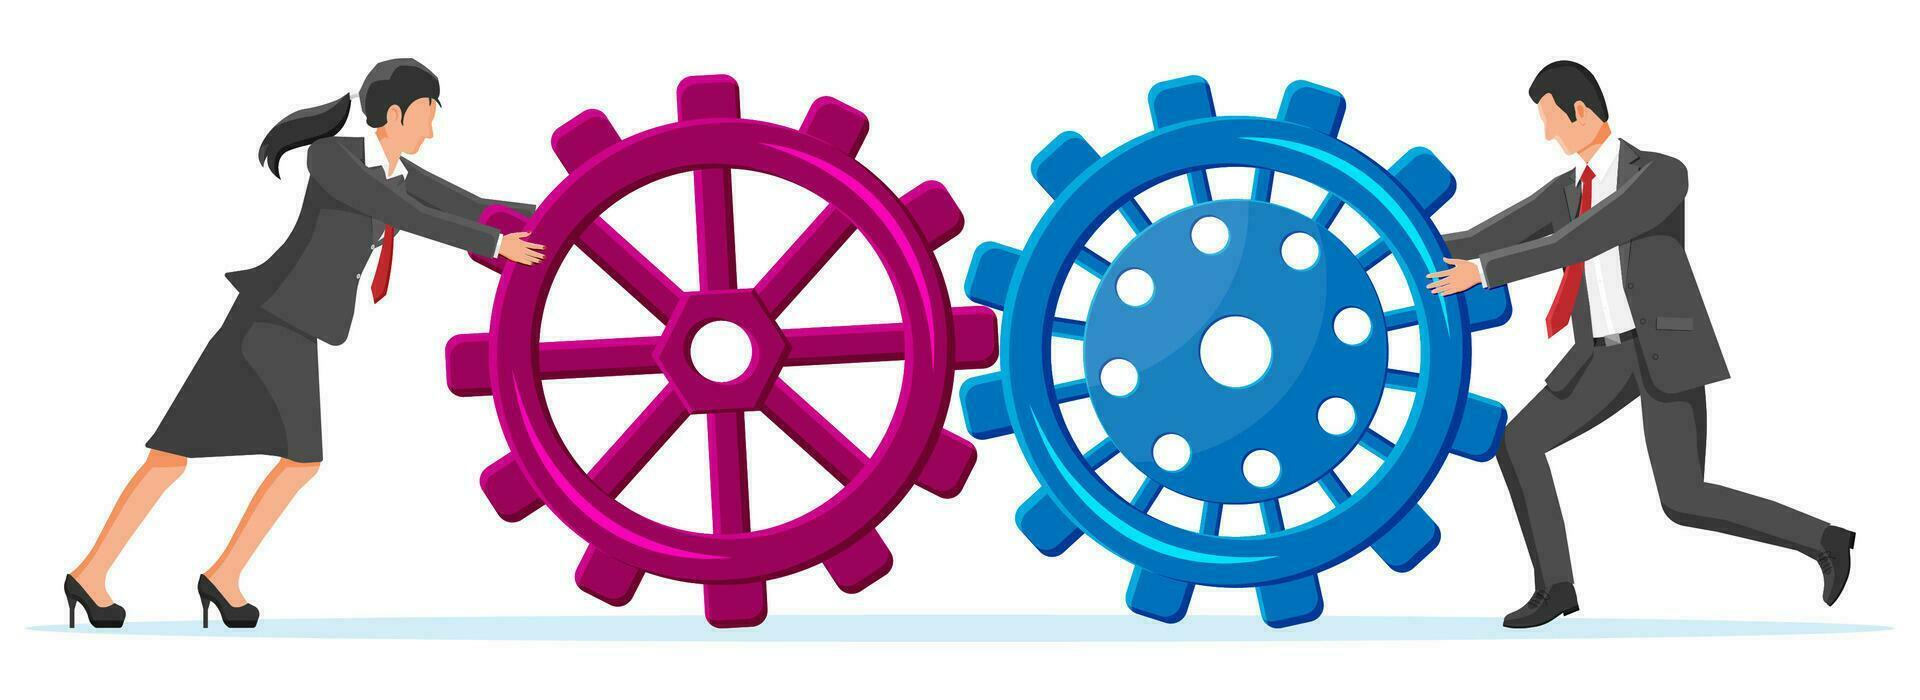 Businessman and businesswoman joining two gears together. Business team and teamwork concept. Partnership, business, cooperation, collaboration and management. Flat vector illustration